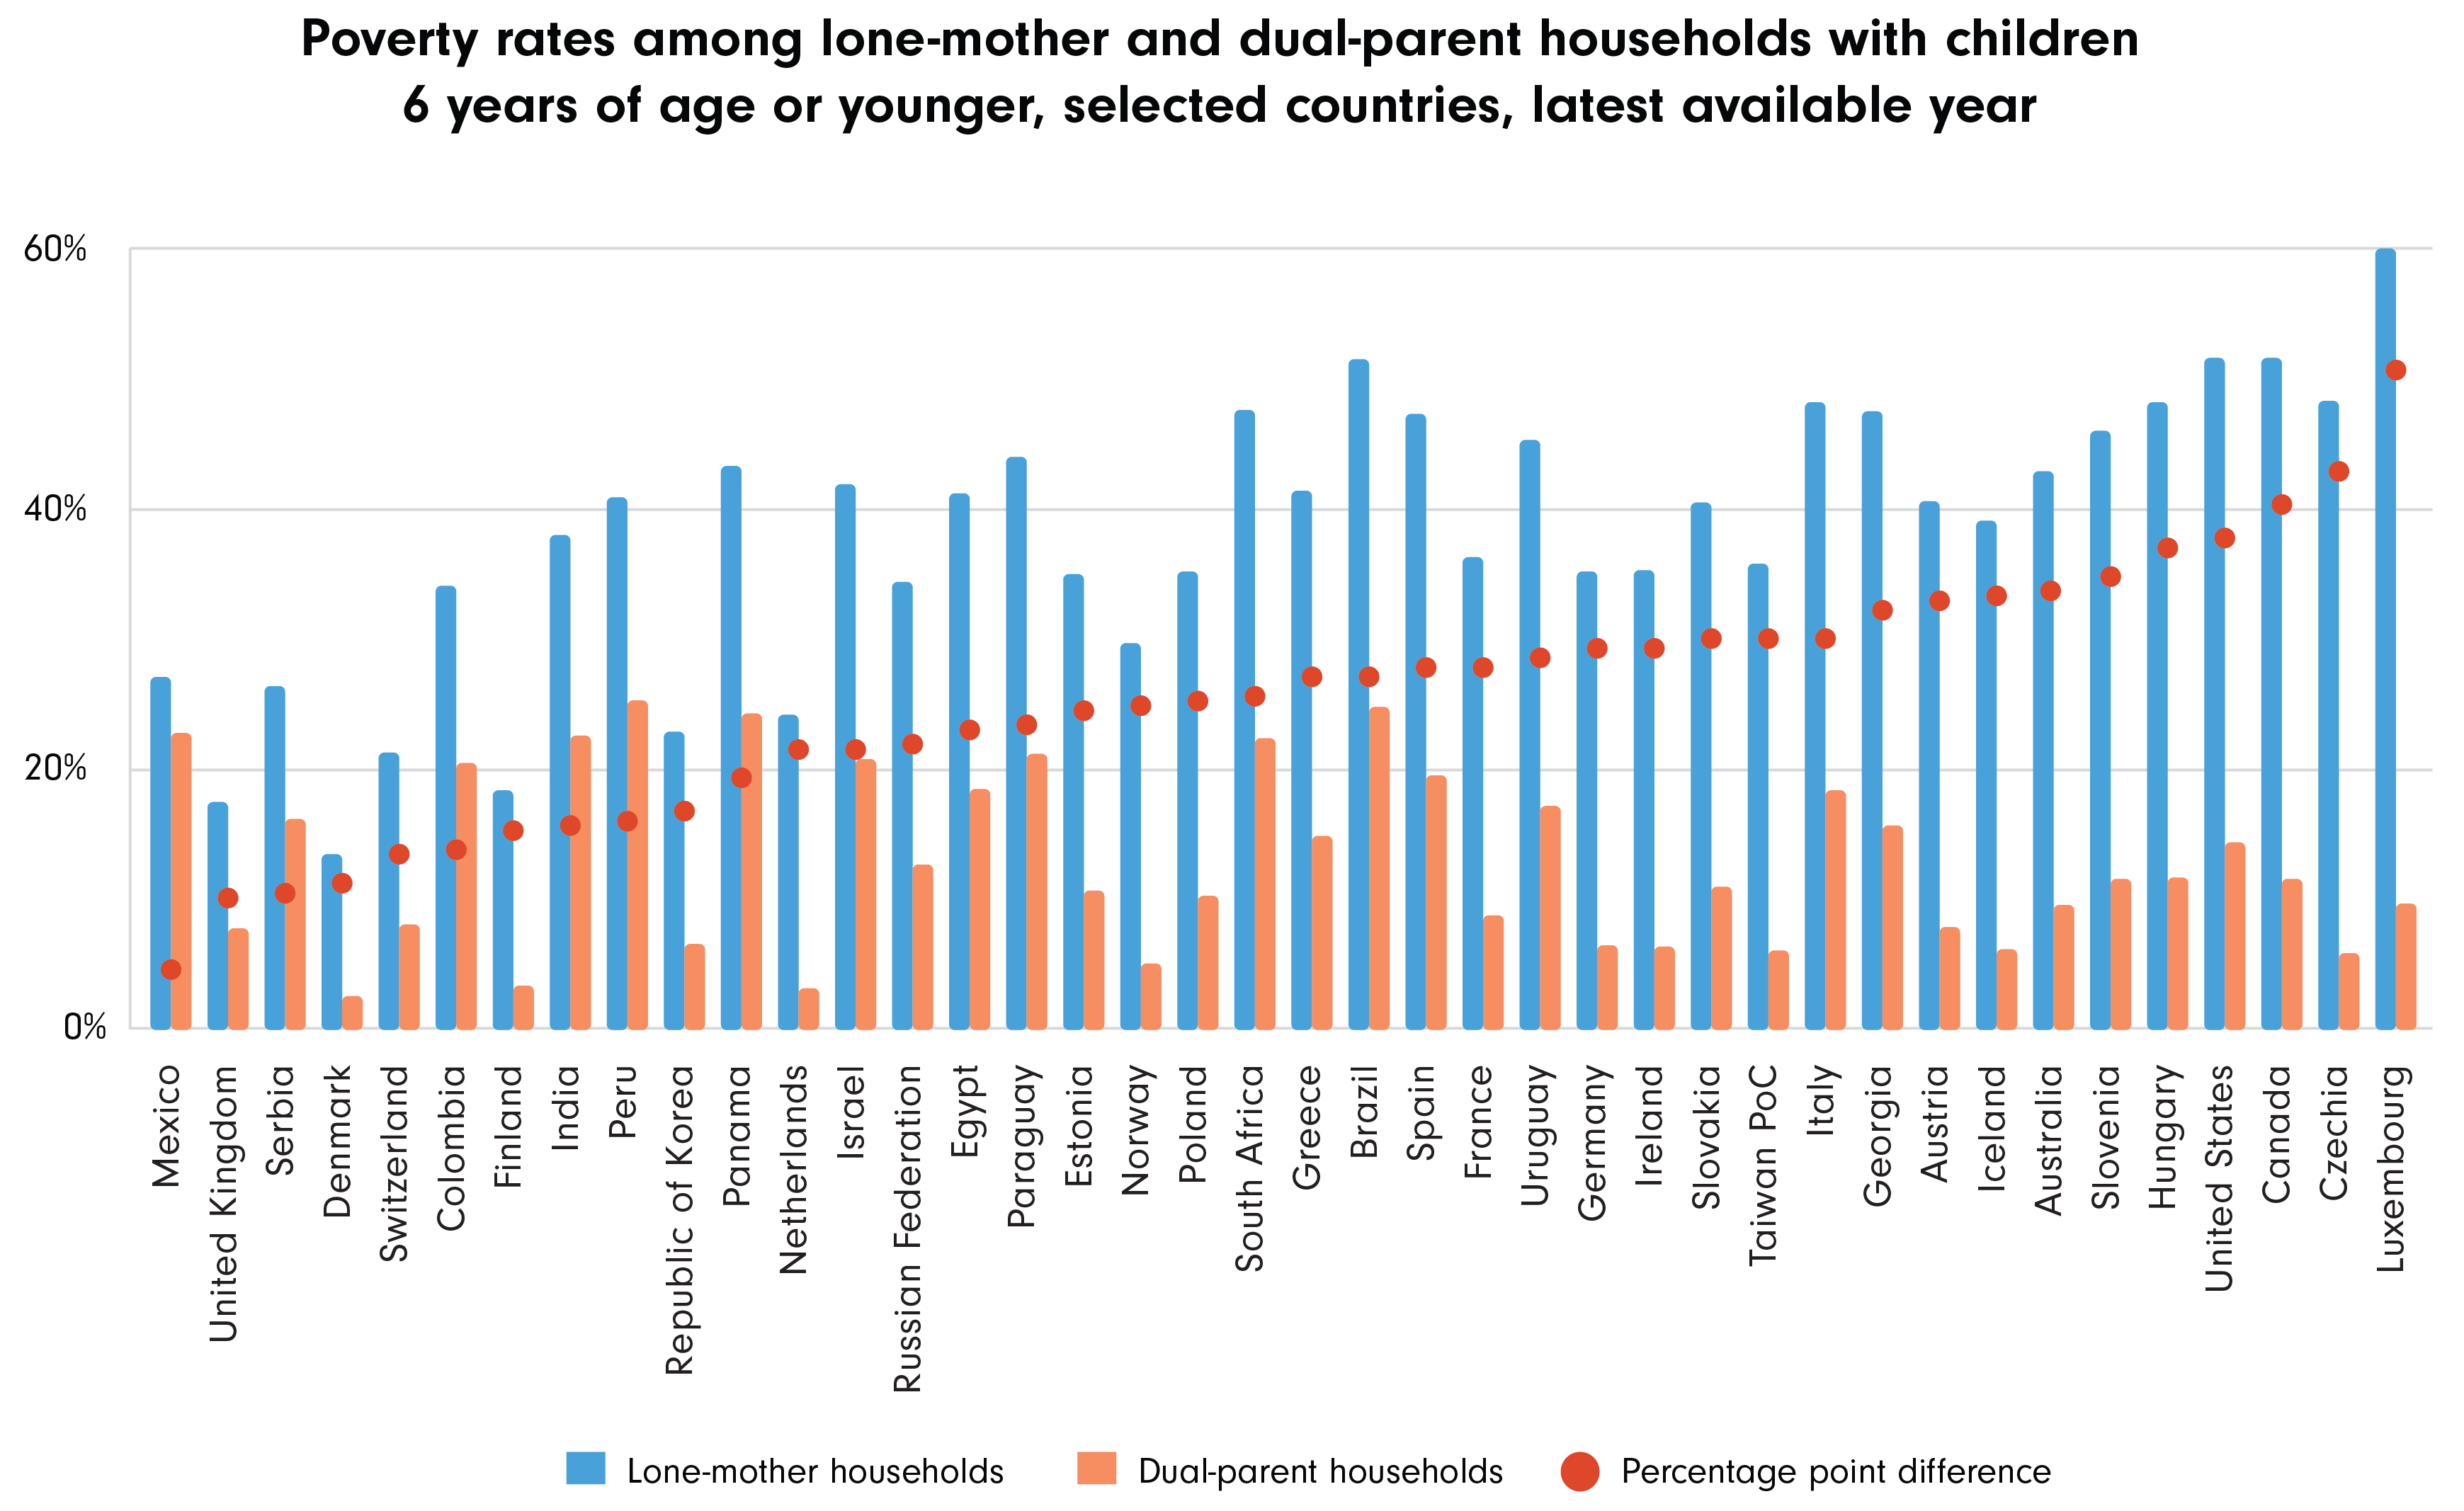 Poverty rates of lone-mother and dual-parent households with children 6 years of age or younger, selected countries. Source: Progress of the World's Women 2019